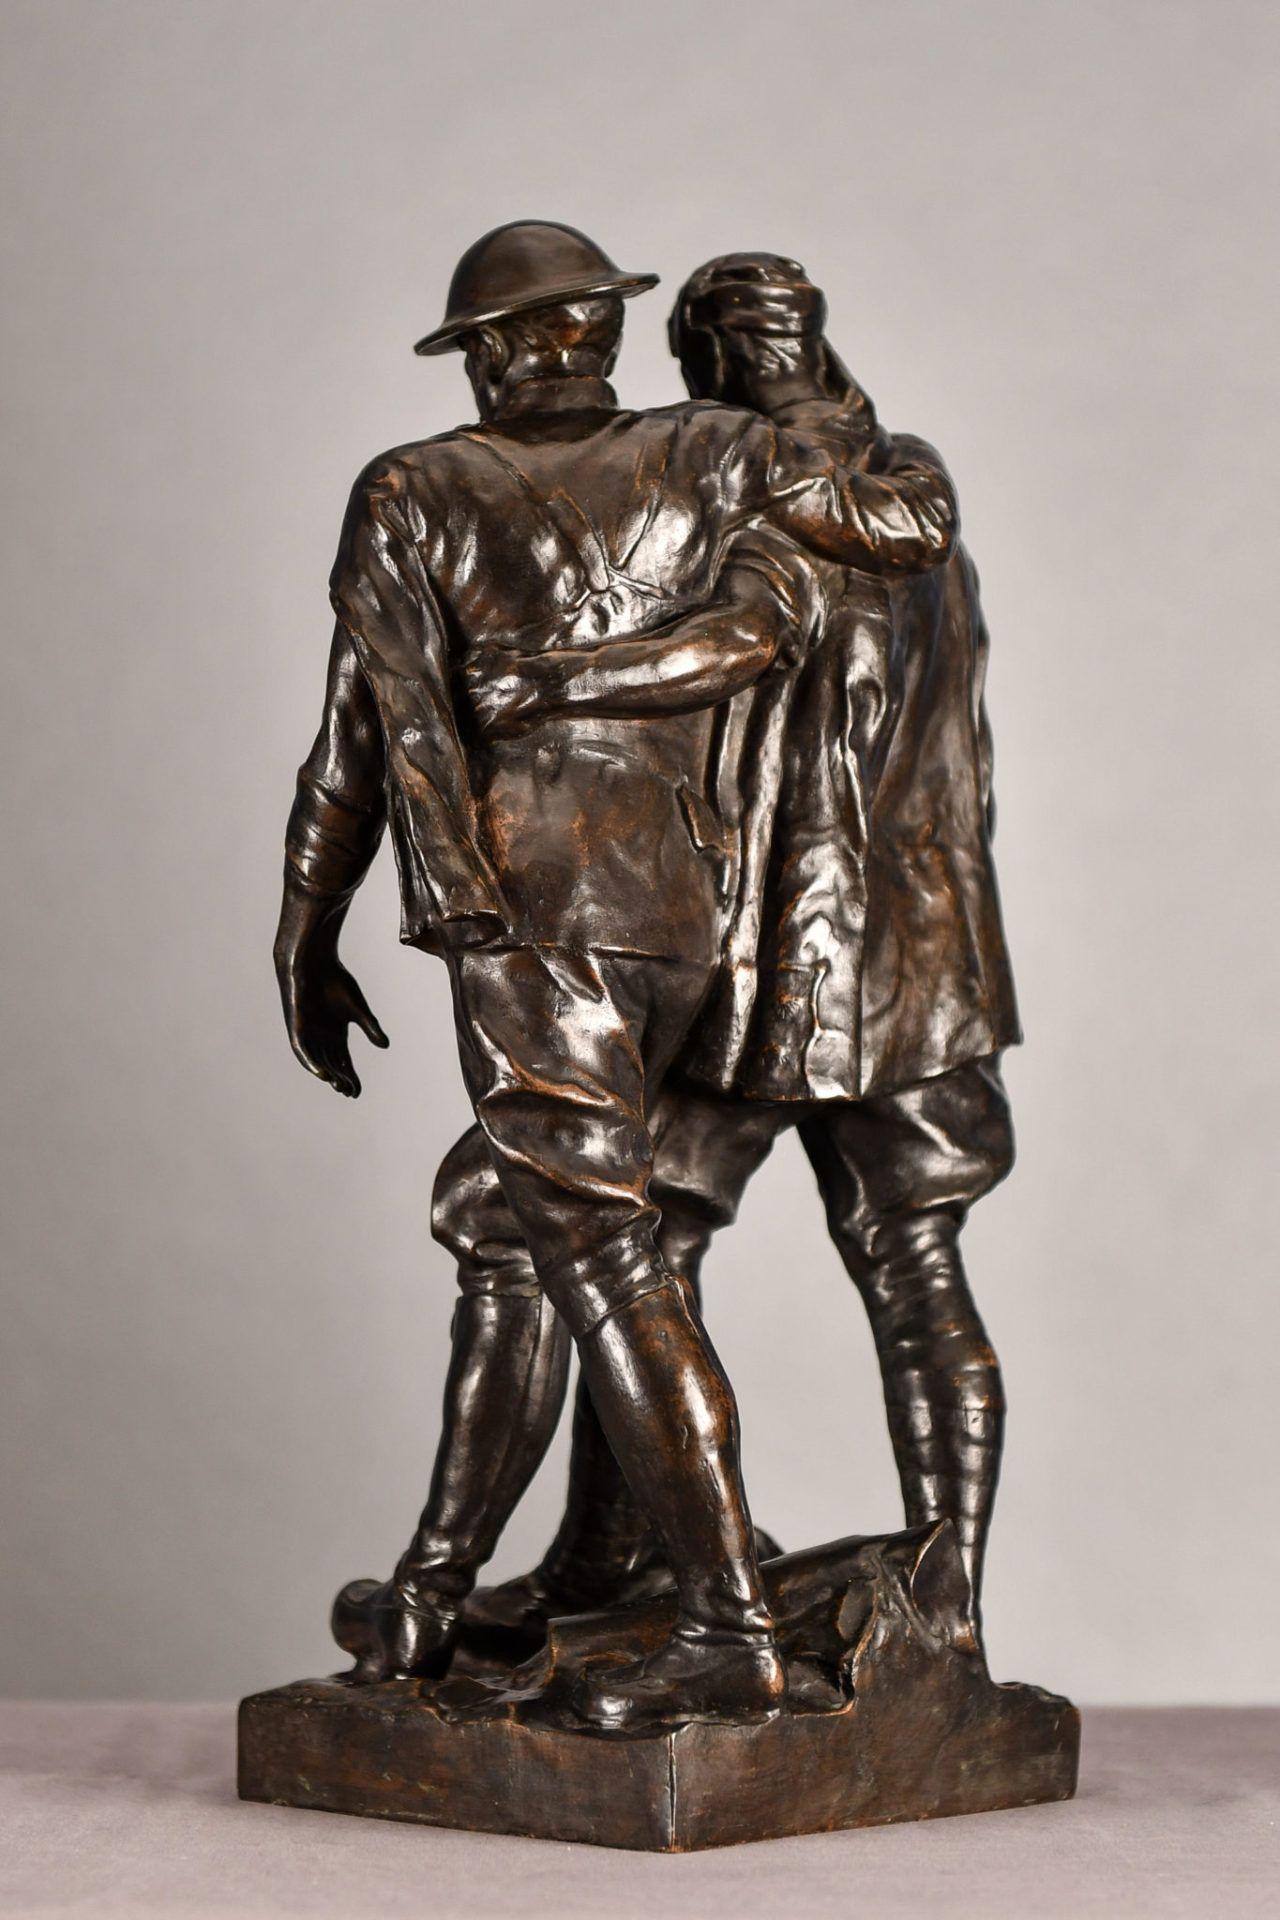 Robert Ingersoll Aitken
Comrades in Arms (Brothers in Arms), 1919
Inscribed 